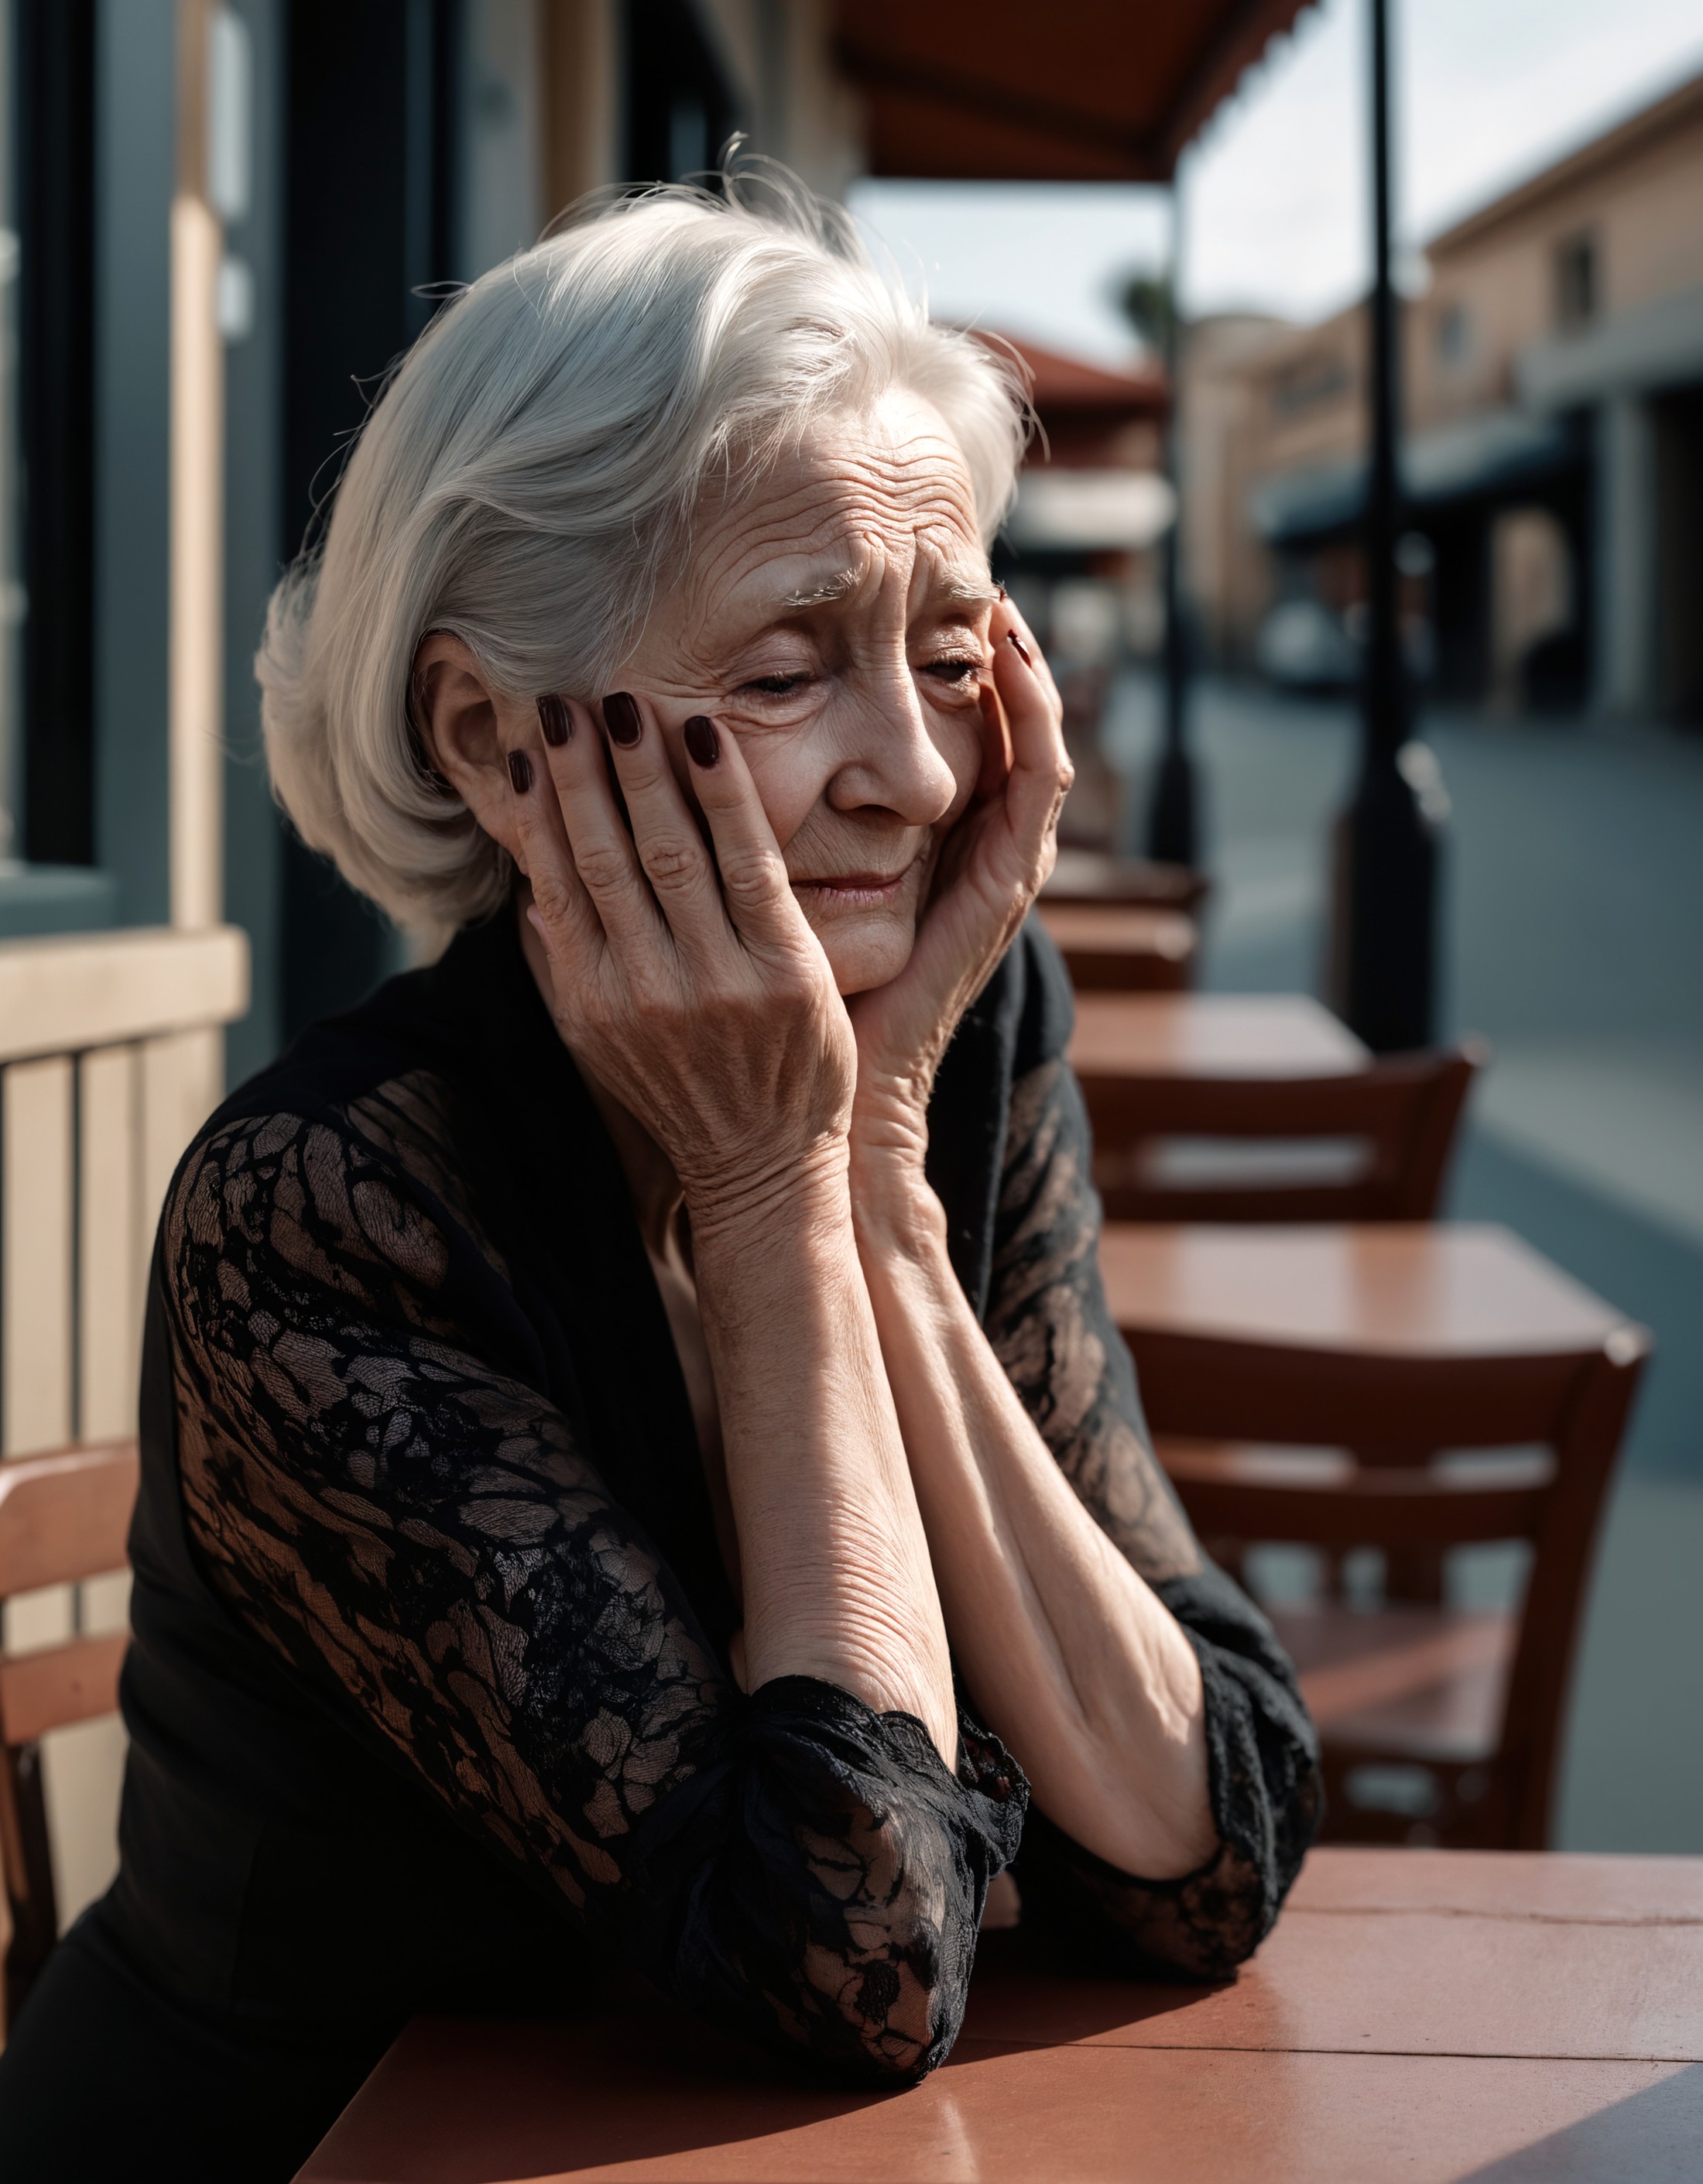 a professional glamour minimalist style photo of the elderly woman, overcome with sorrow, covers her face.her hands clutch...